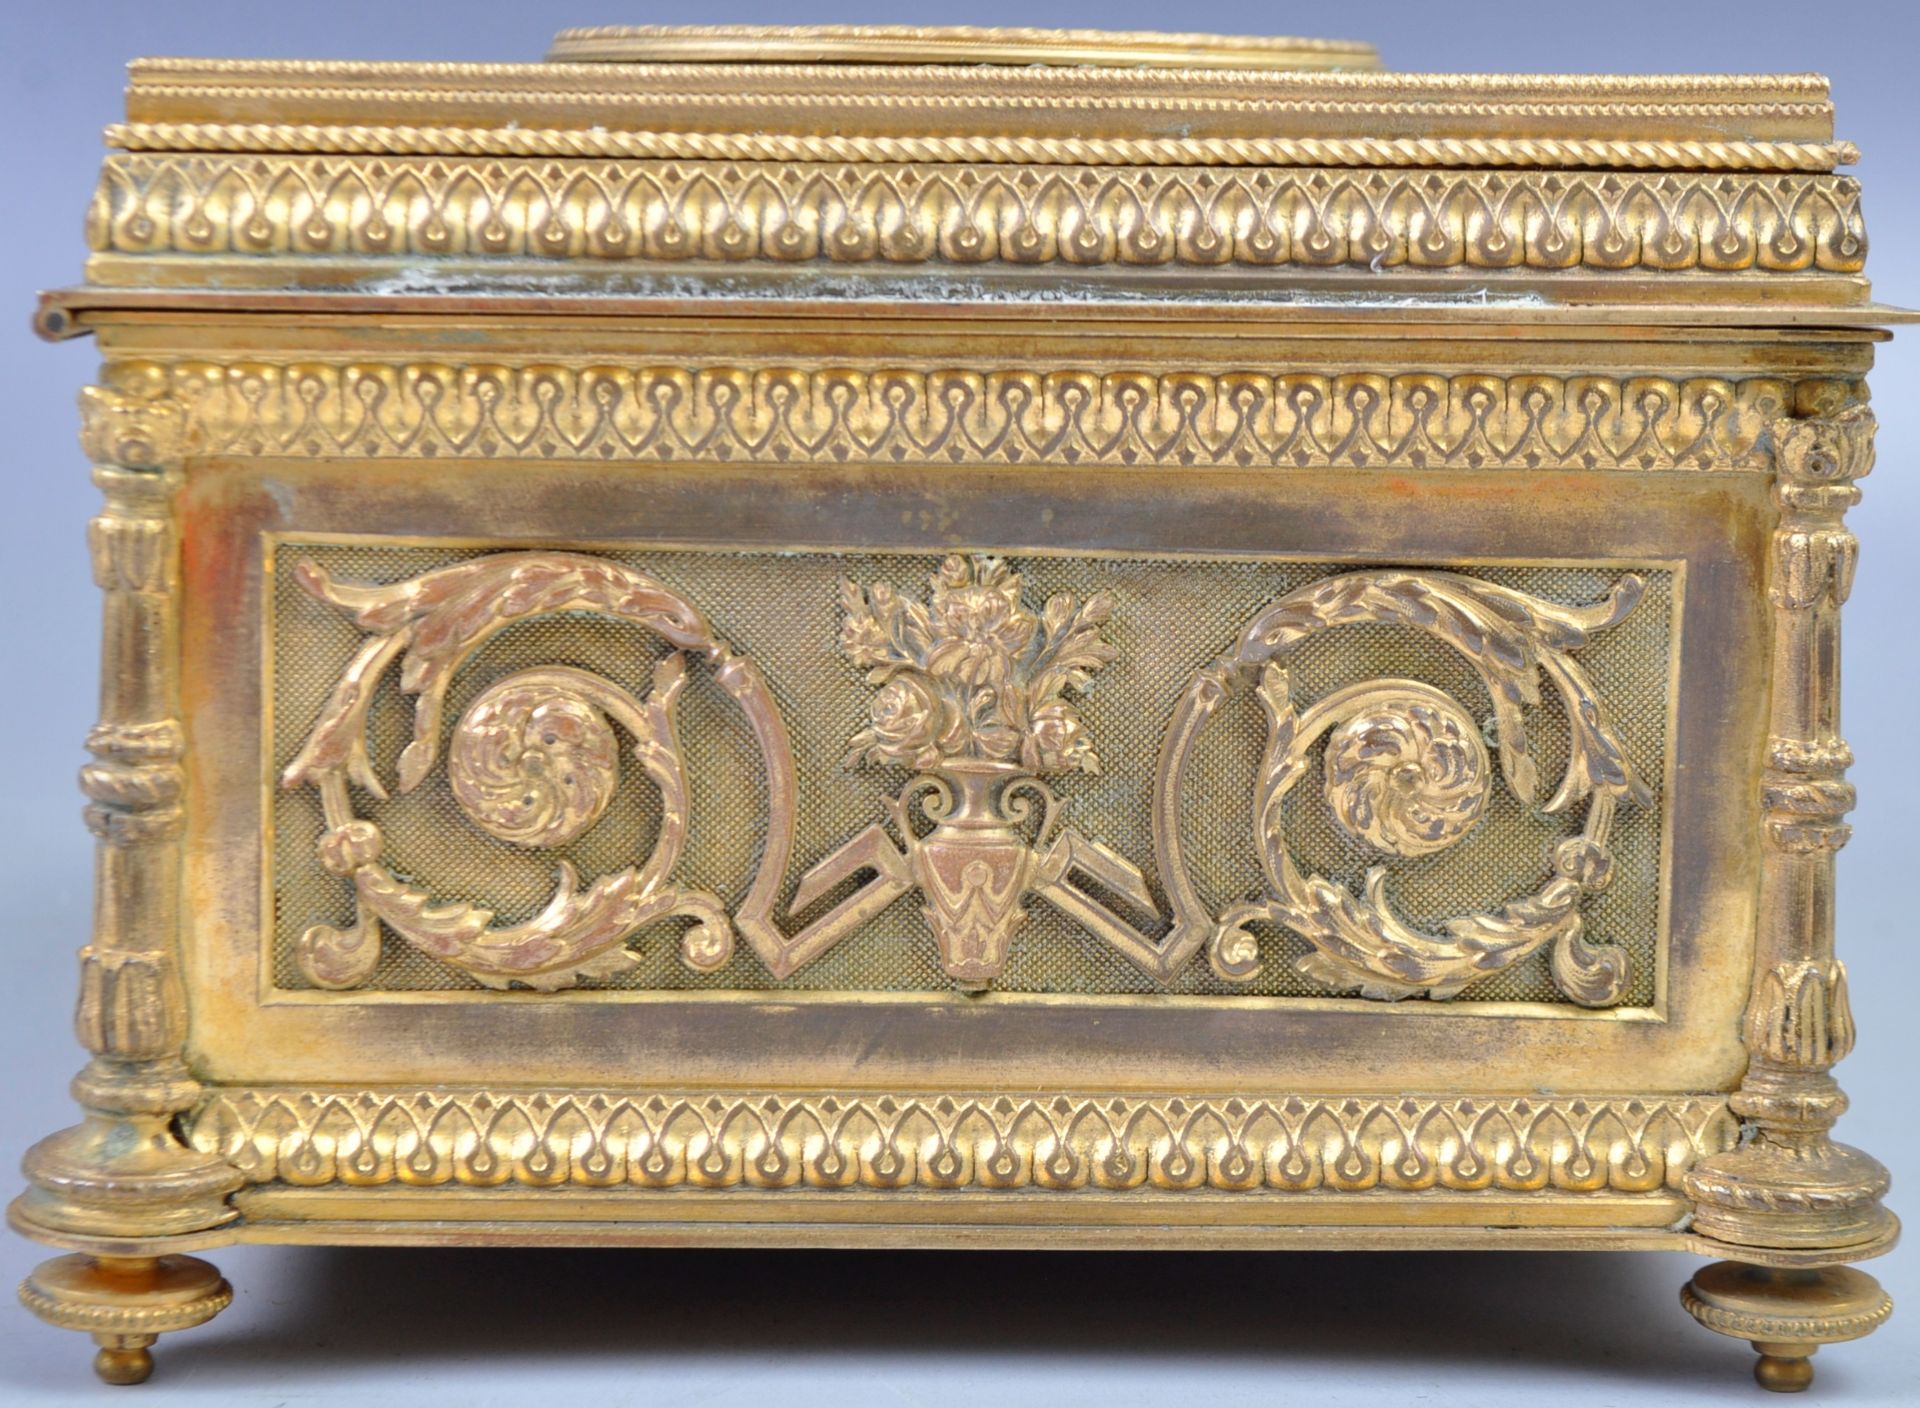 19TH CENTURY FRENCH PALAIS ROYALE GILDED ORMOLU CASKET - Image 5 of 6